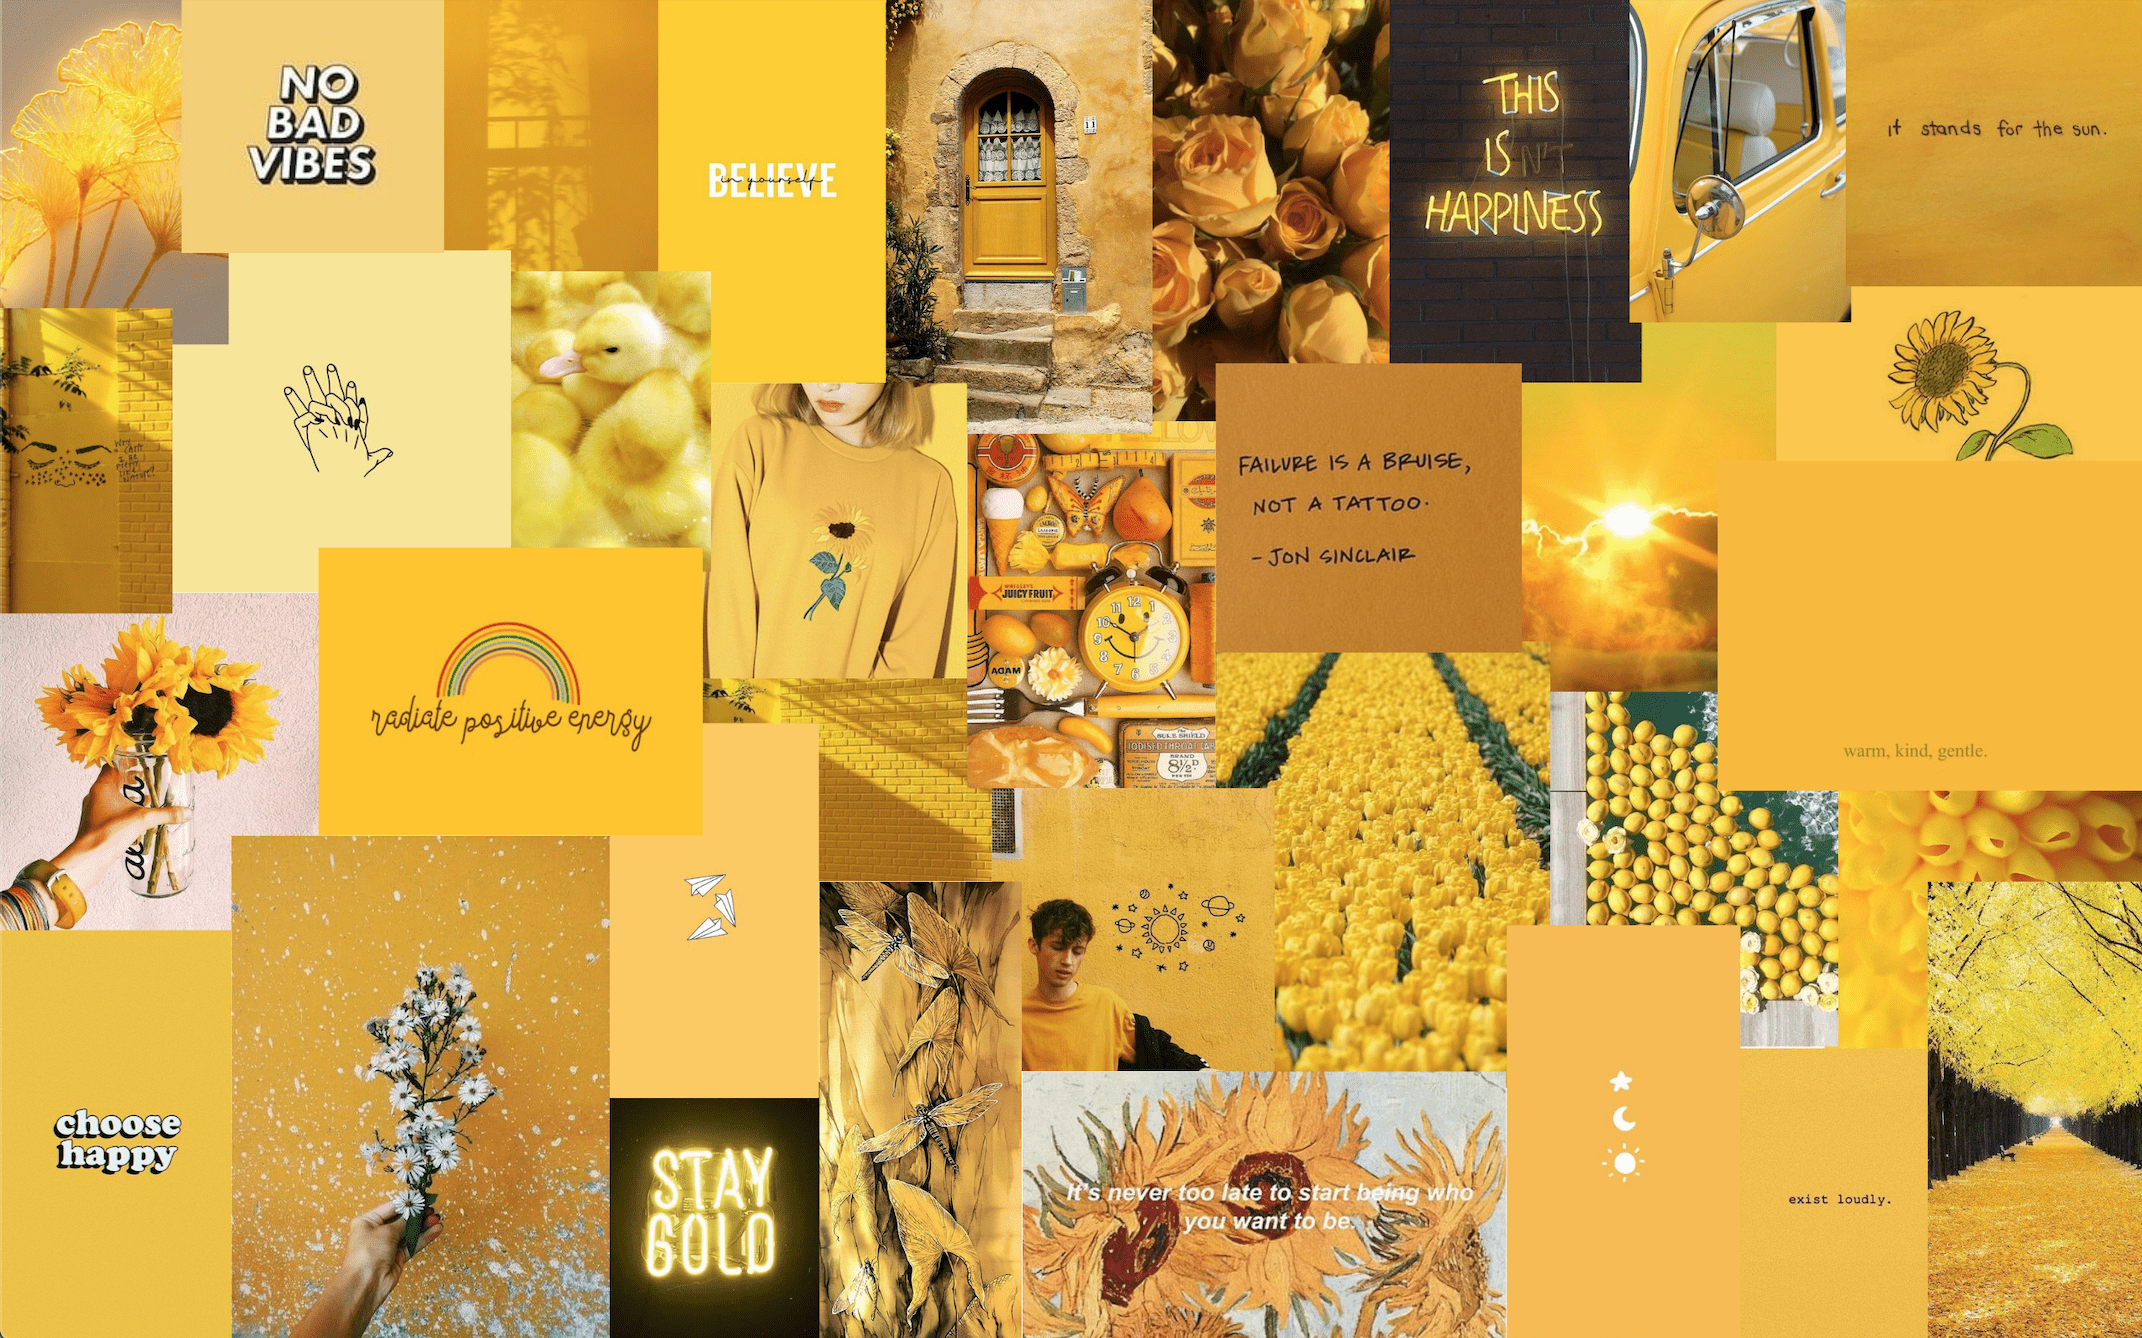 Aesthetic Yellow Collage wallpaper, cute and girly, perfect for phone or desktop background. At least 20 words but no longer than 50 words. - Laptop, yellow, collage, pastel yellow, light yellow